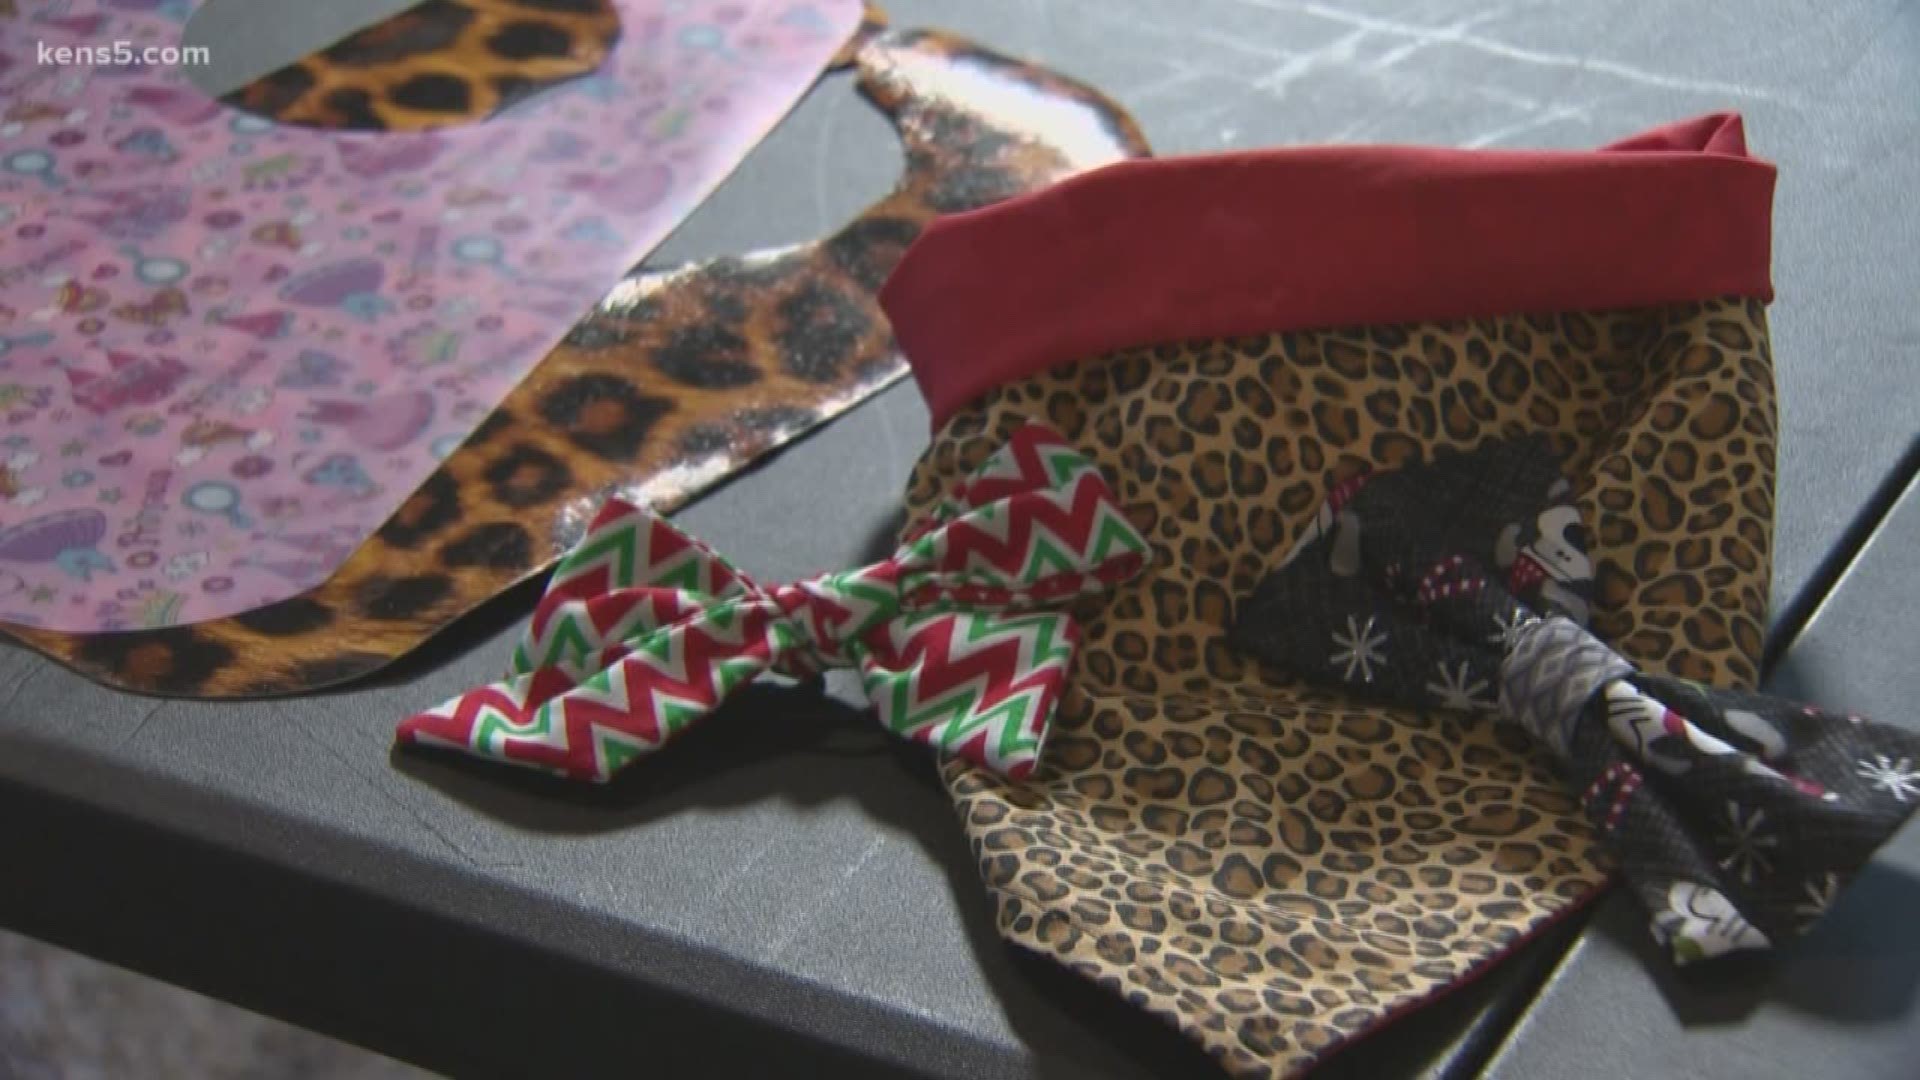 In this week's Made in SA, a mom finds her talents making children's products.